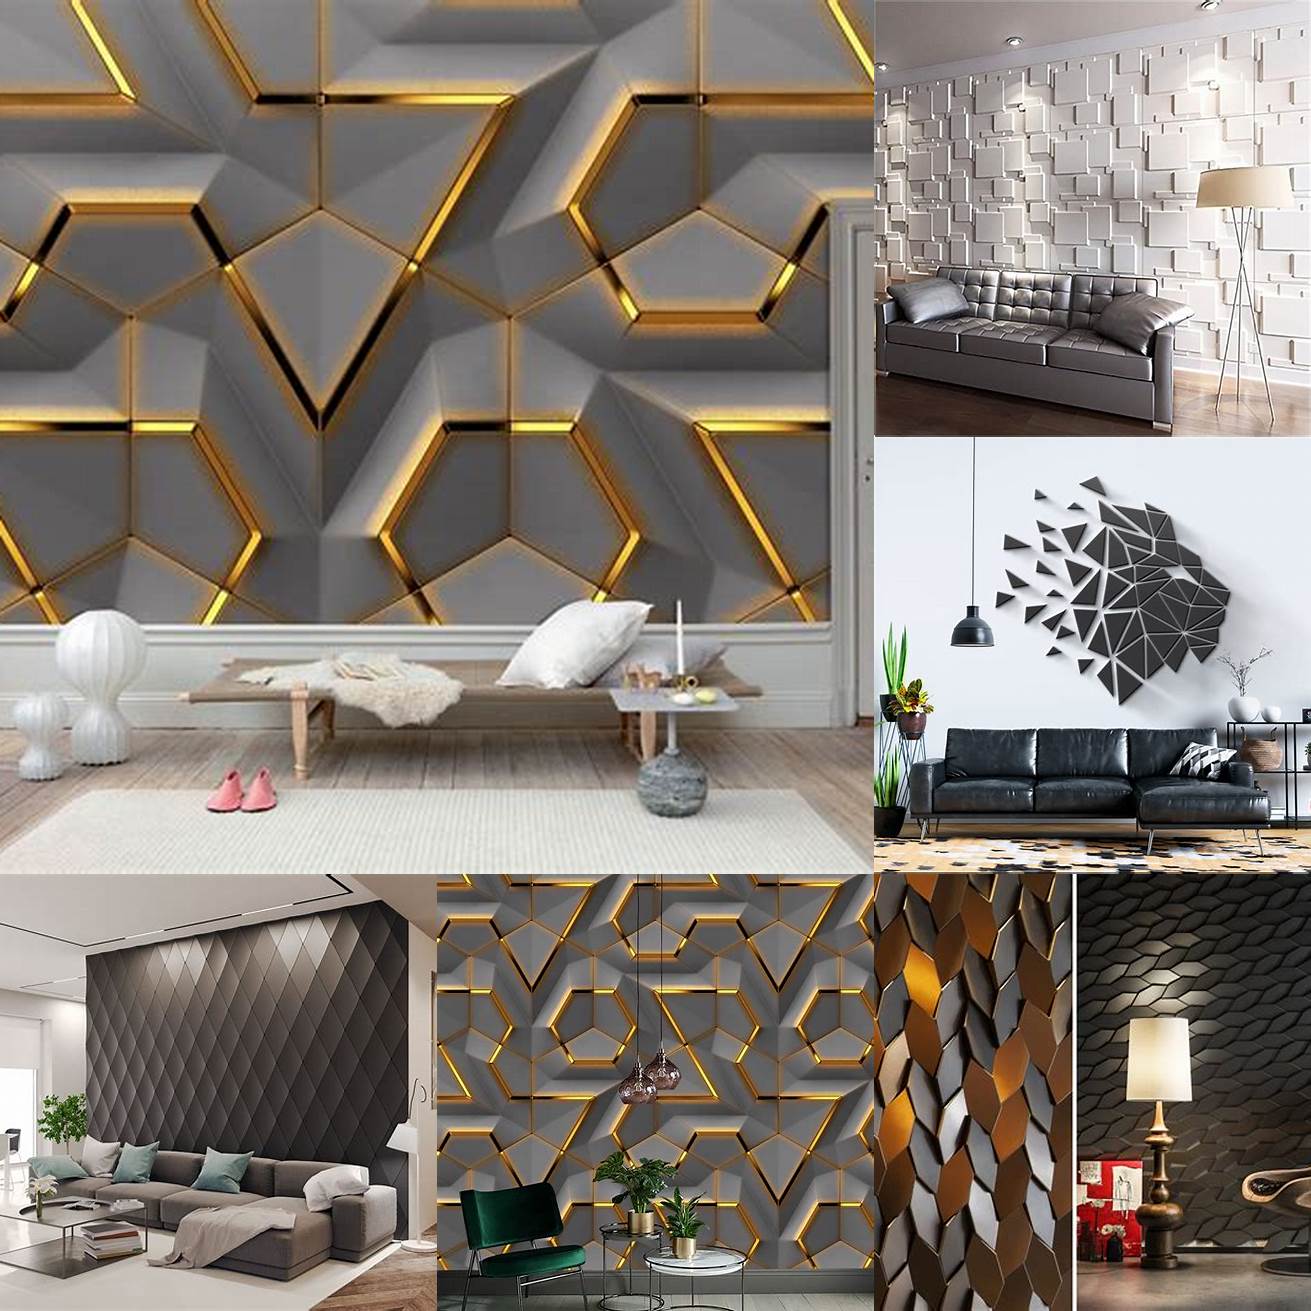 3D Wall Panels with a Geometric Pattern